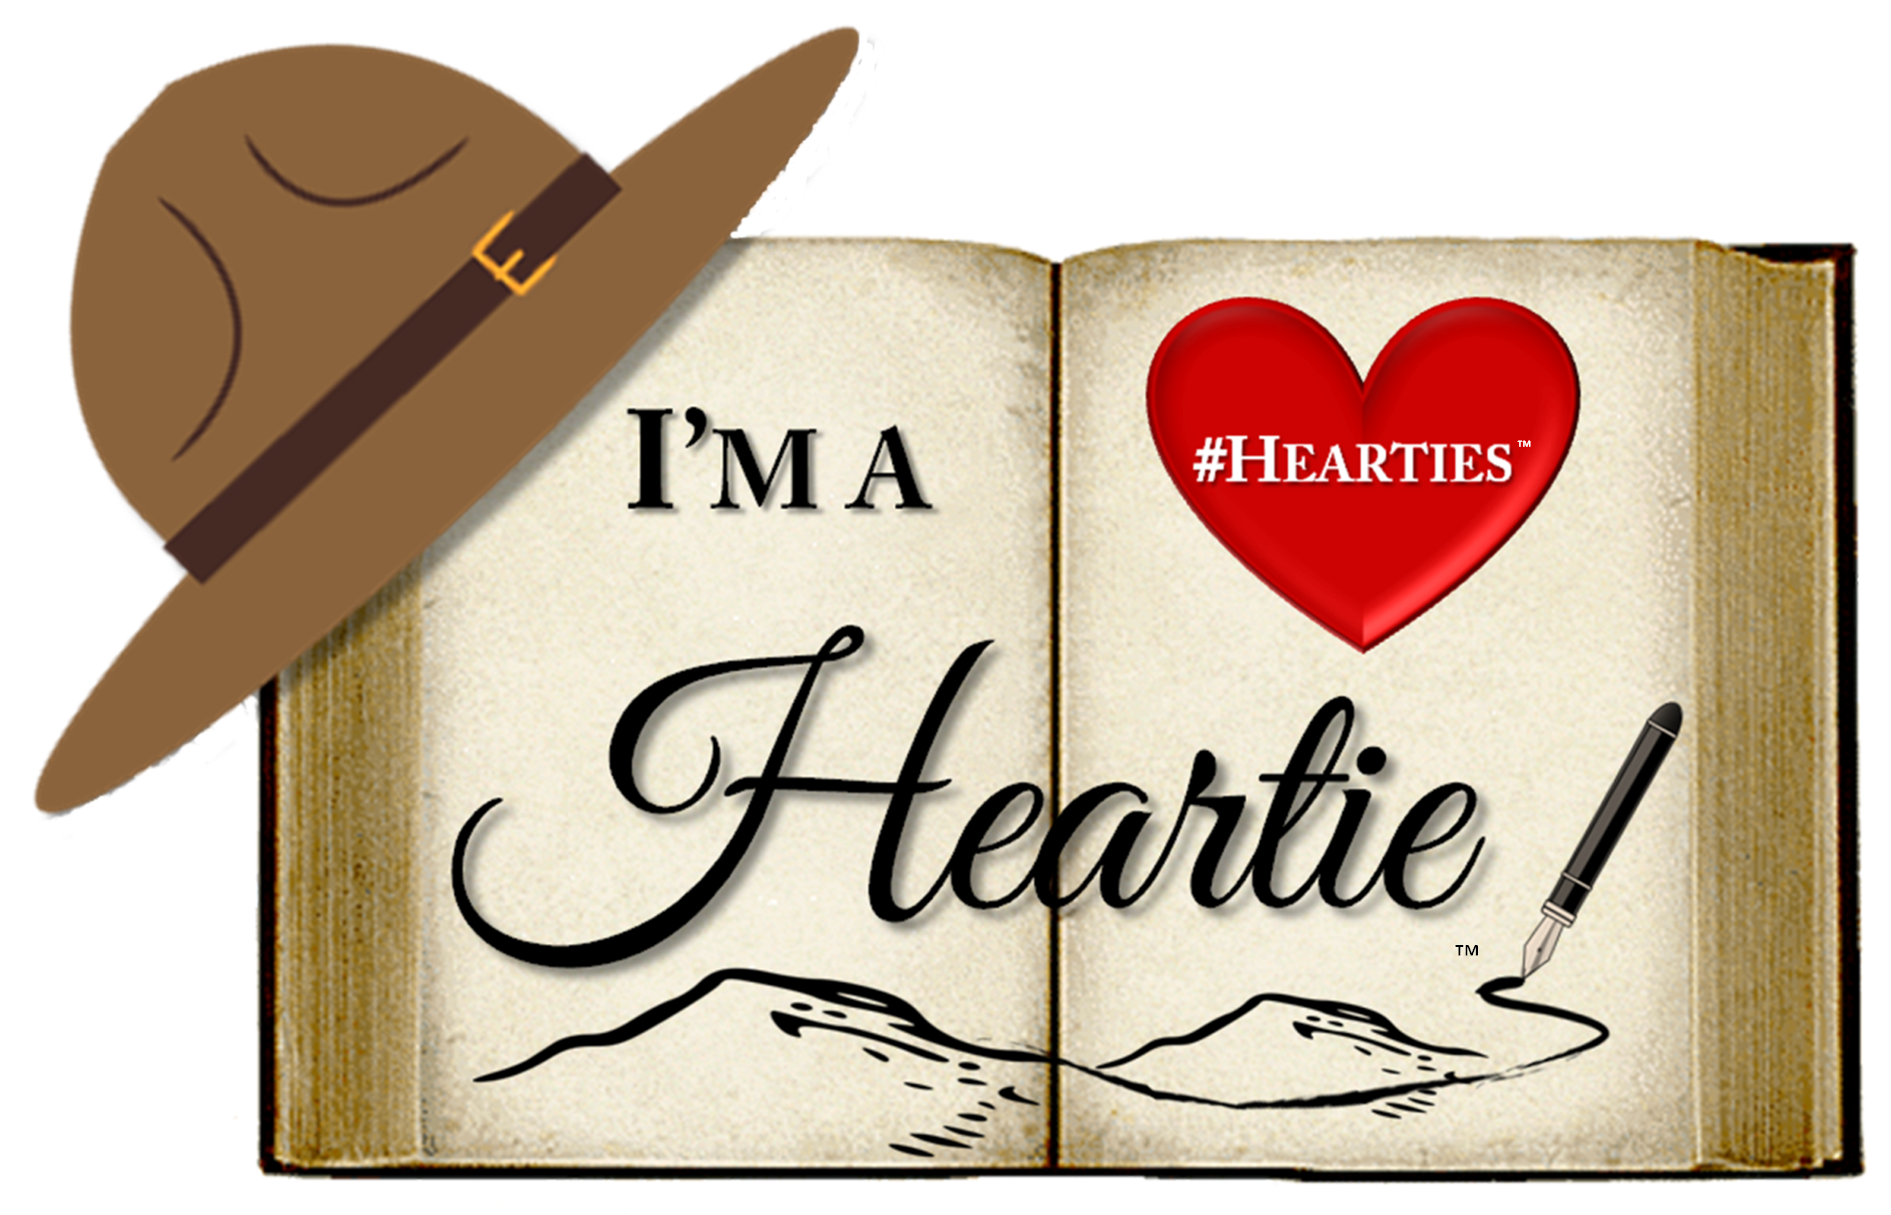 History of the Hearties' logos by Amy Drown